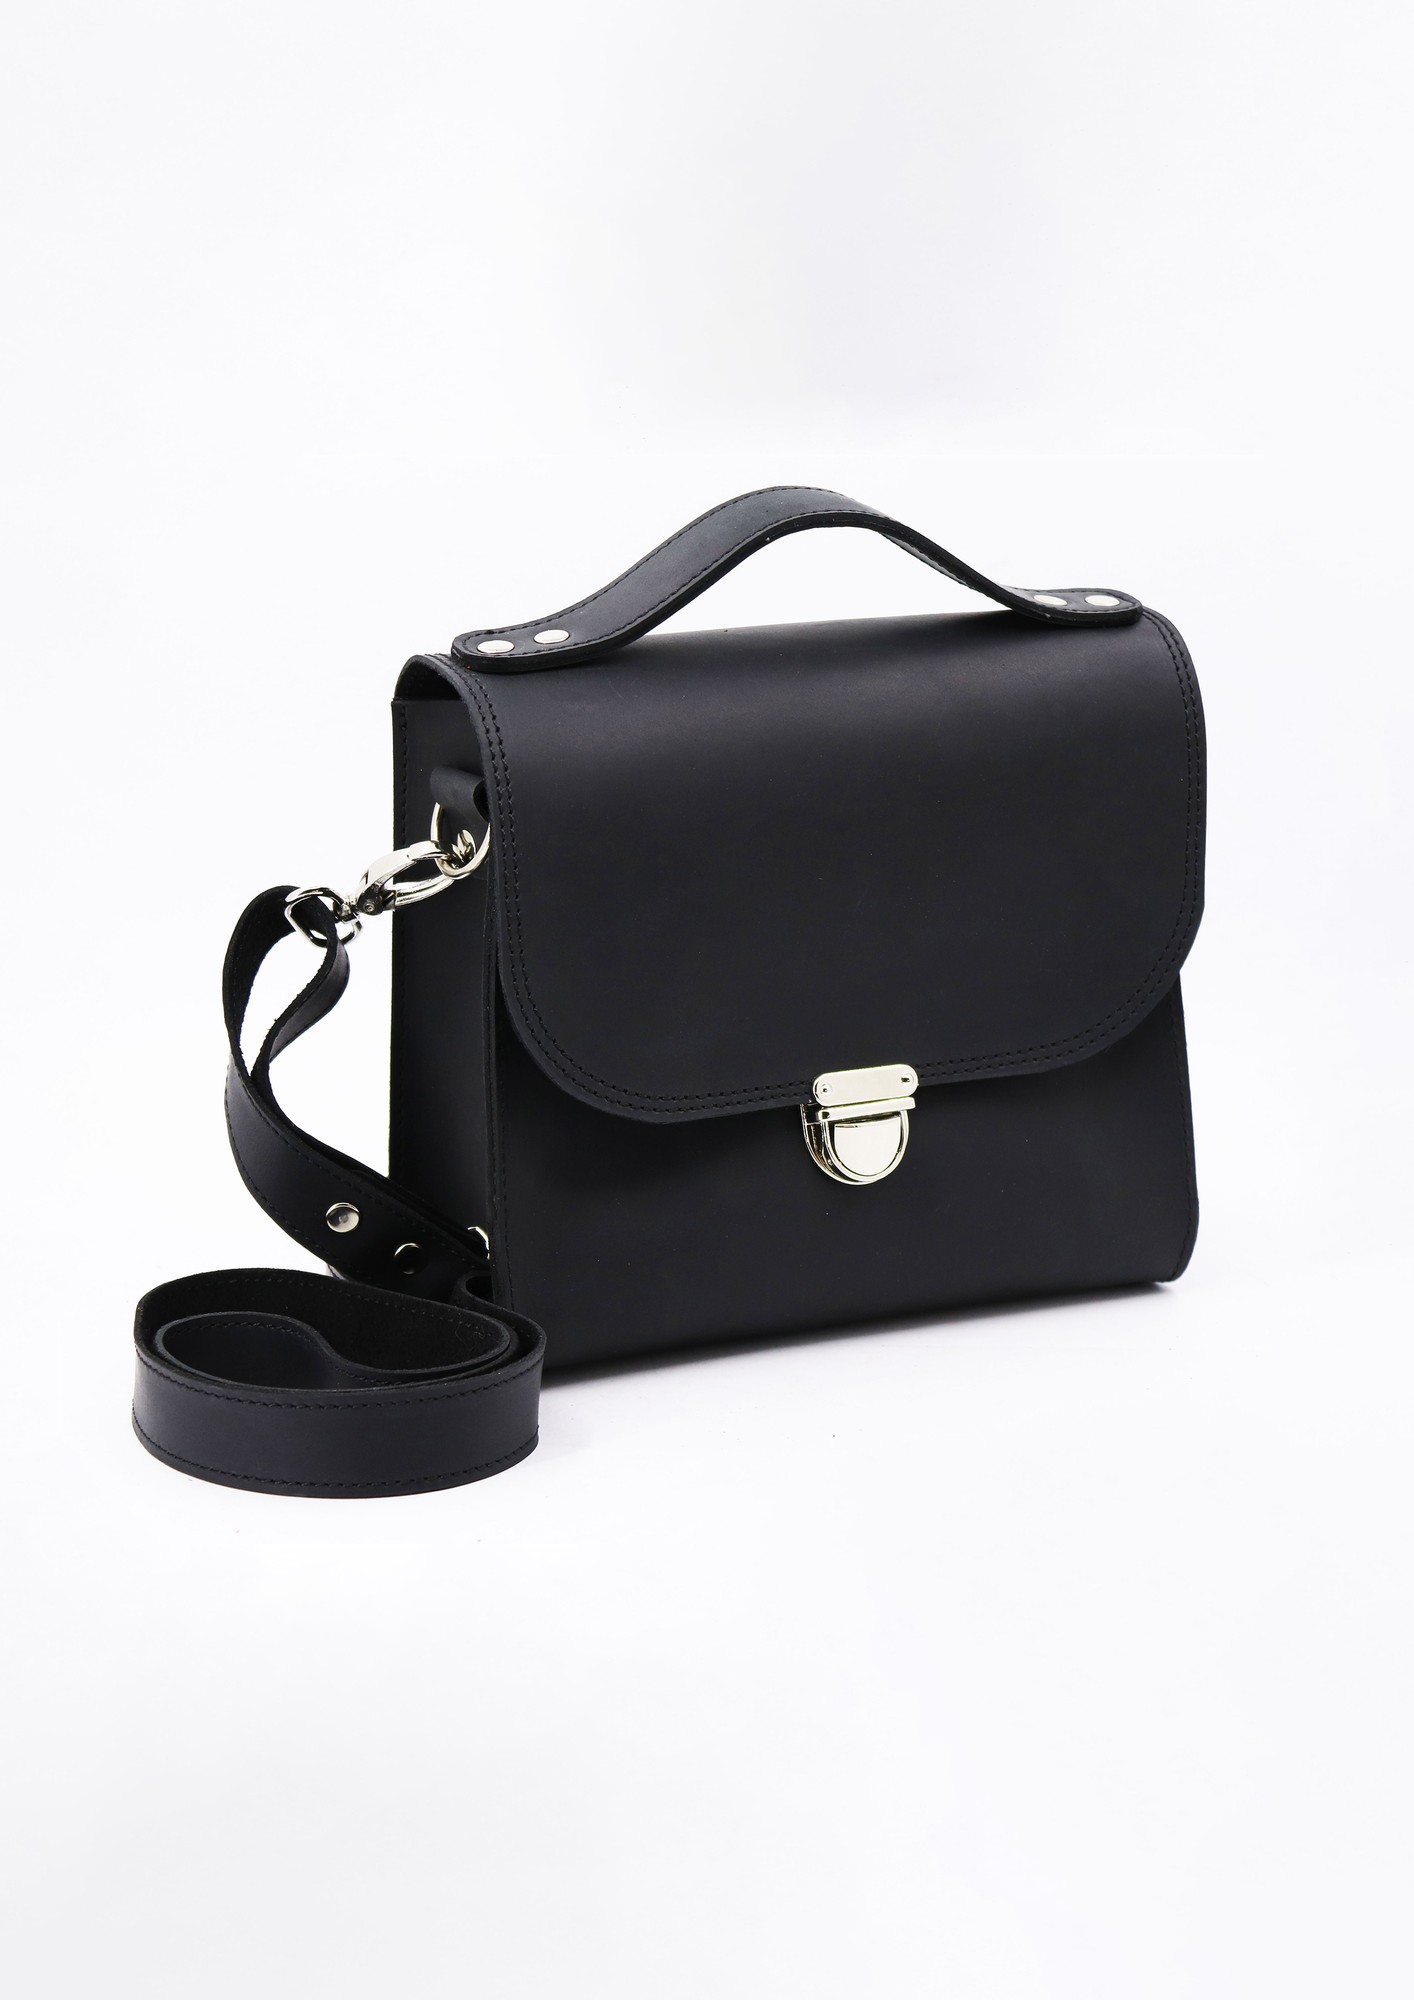 Small minimalist handmade women's briefcase/bag with top handle and shoulder strap/ Black/ 01034